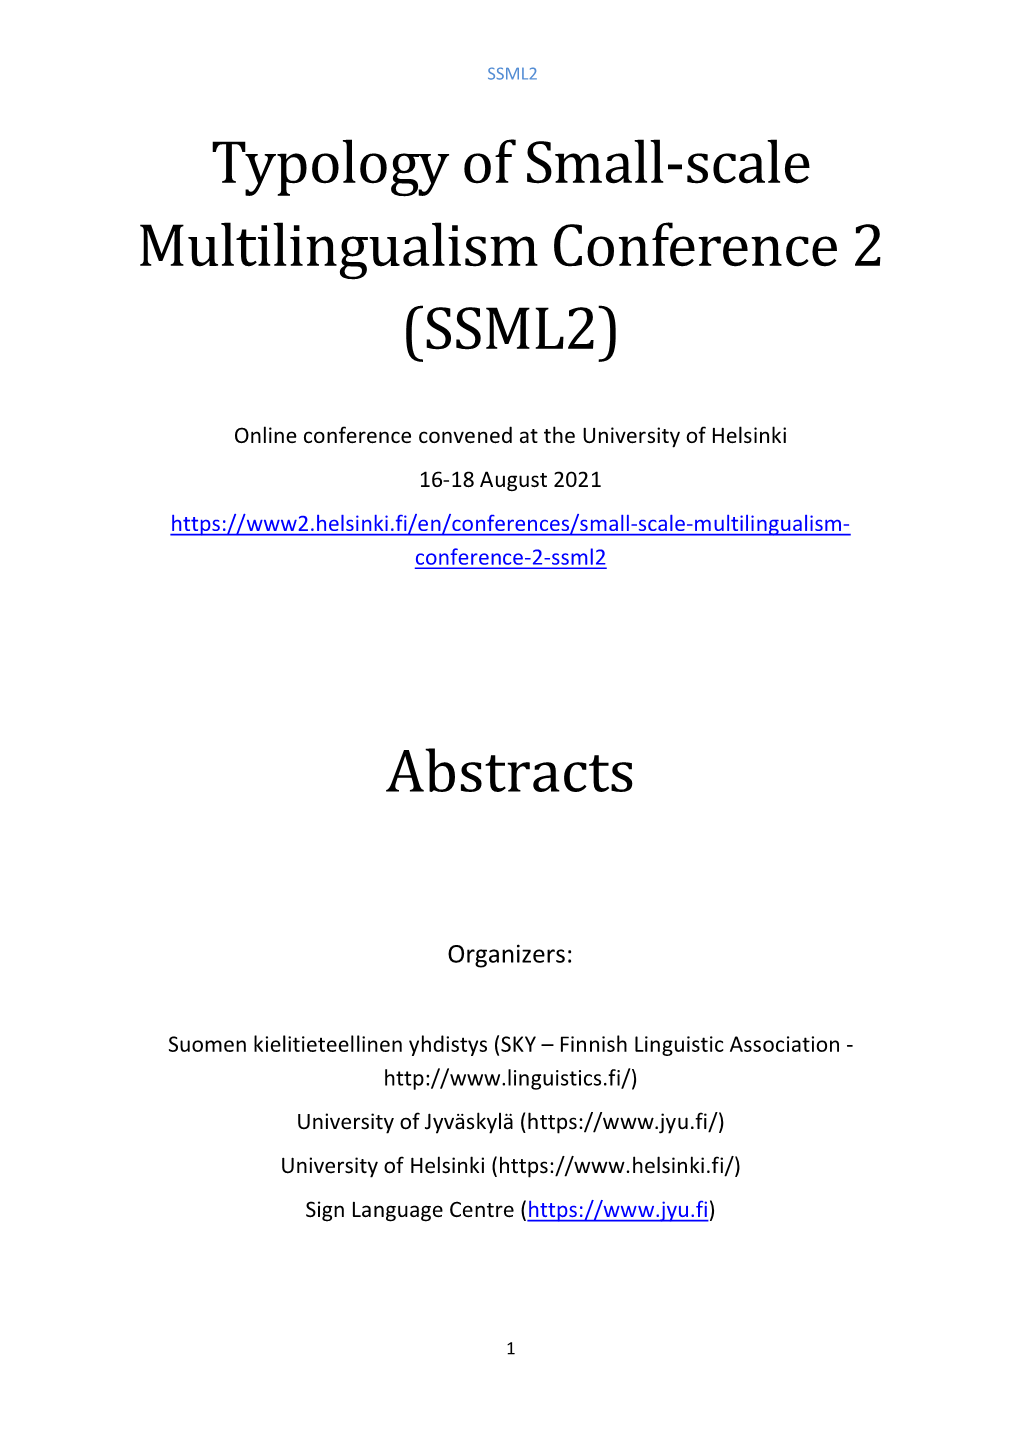 Typology of Small-Scale Multilingualism Conference 2 (SSML2)